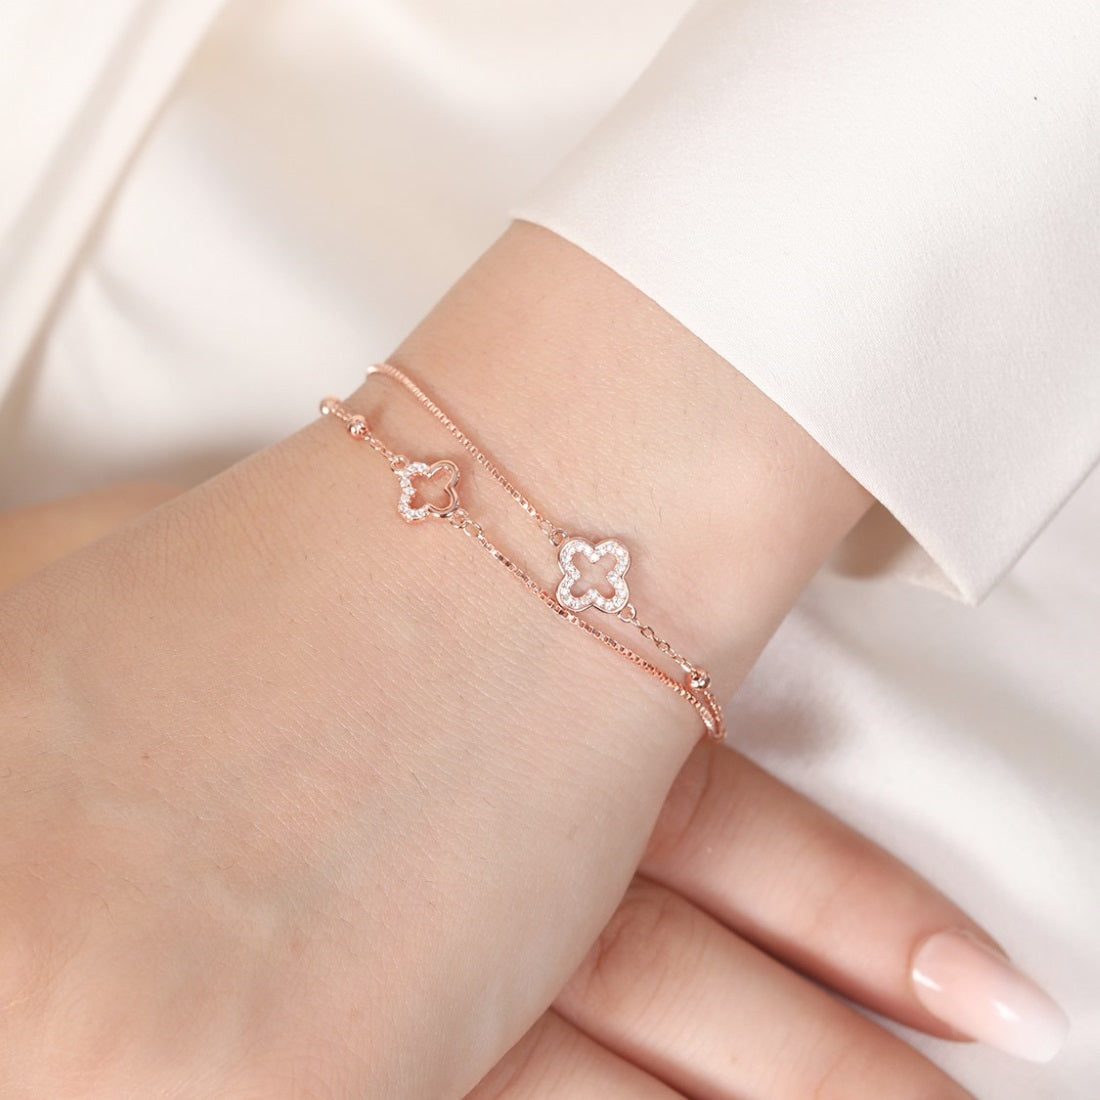 Charming Duo Rose Gold Plated 925 Sterling Silver Bracelet